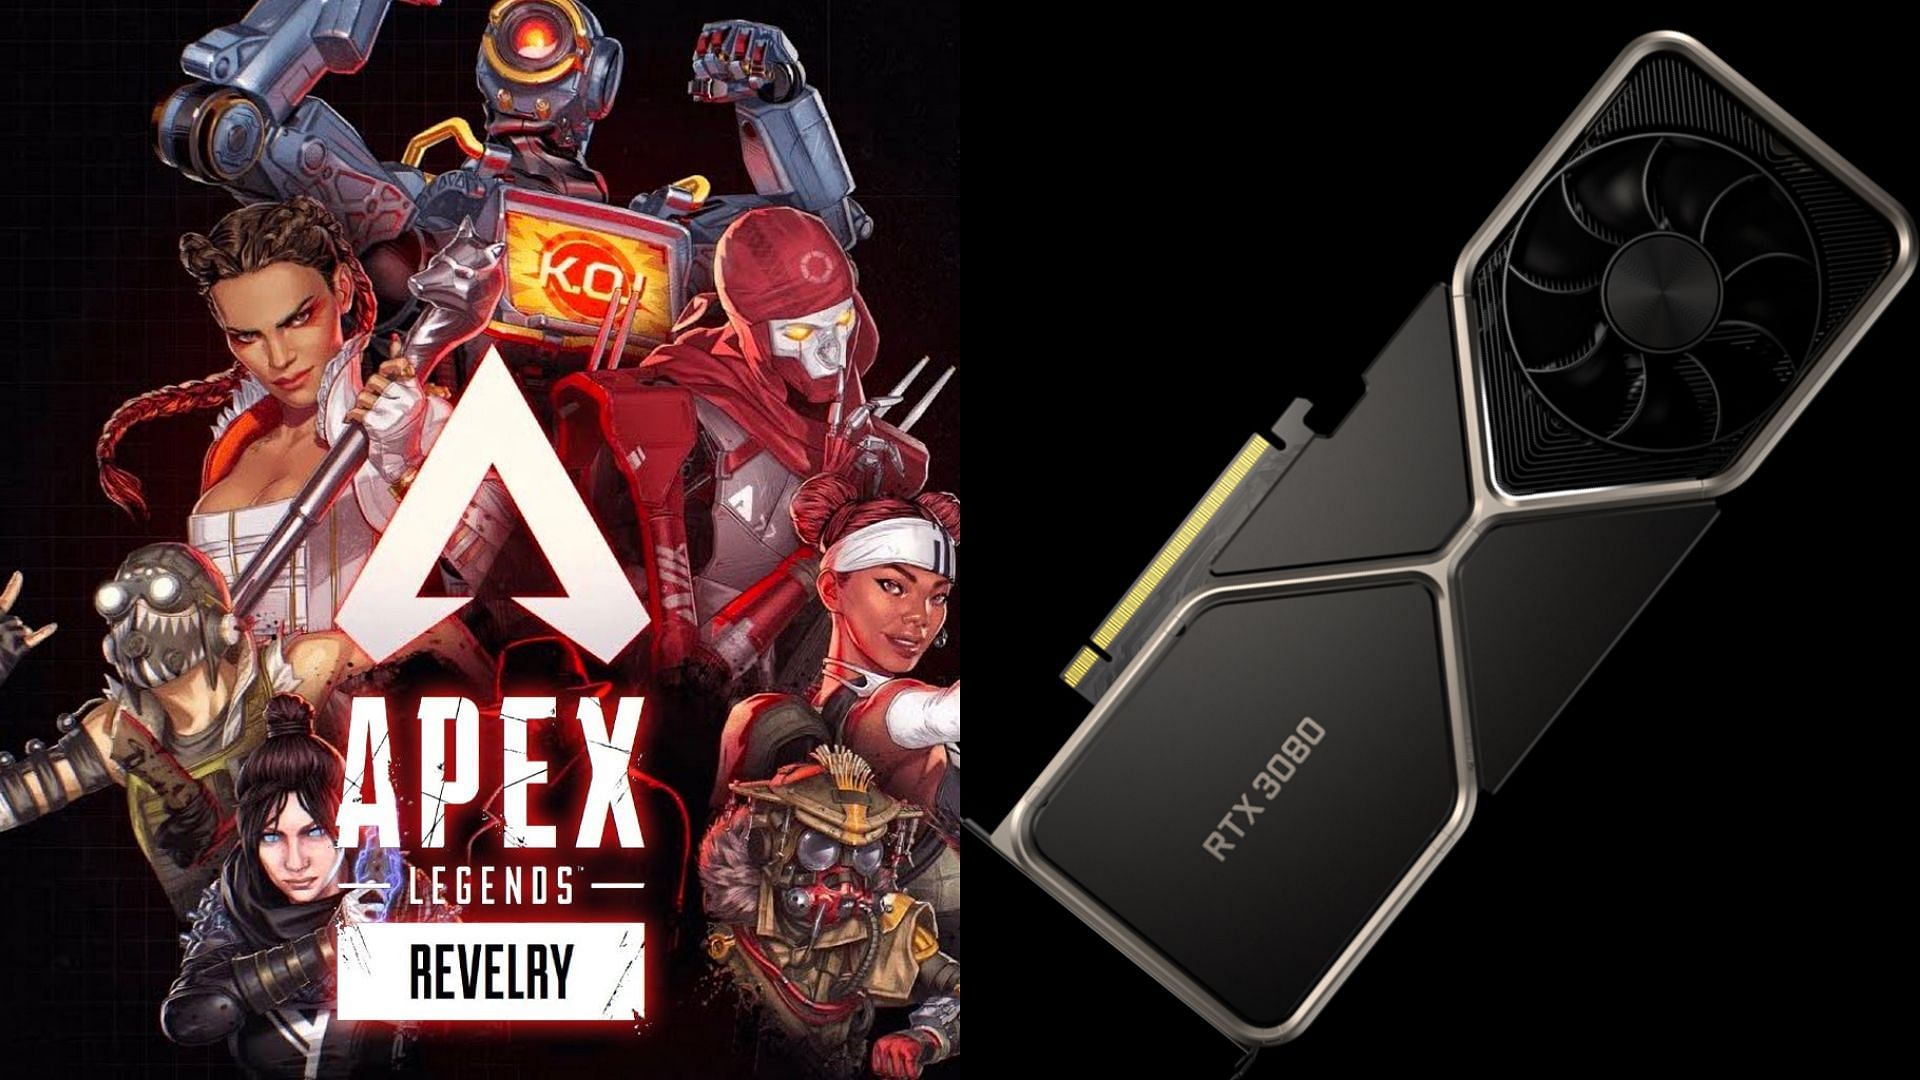 The Nvidia RTX 3080 and 3080 Ti are powerful cards for playing Apex Legends (Image via Nvidia and EA)